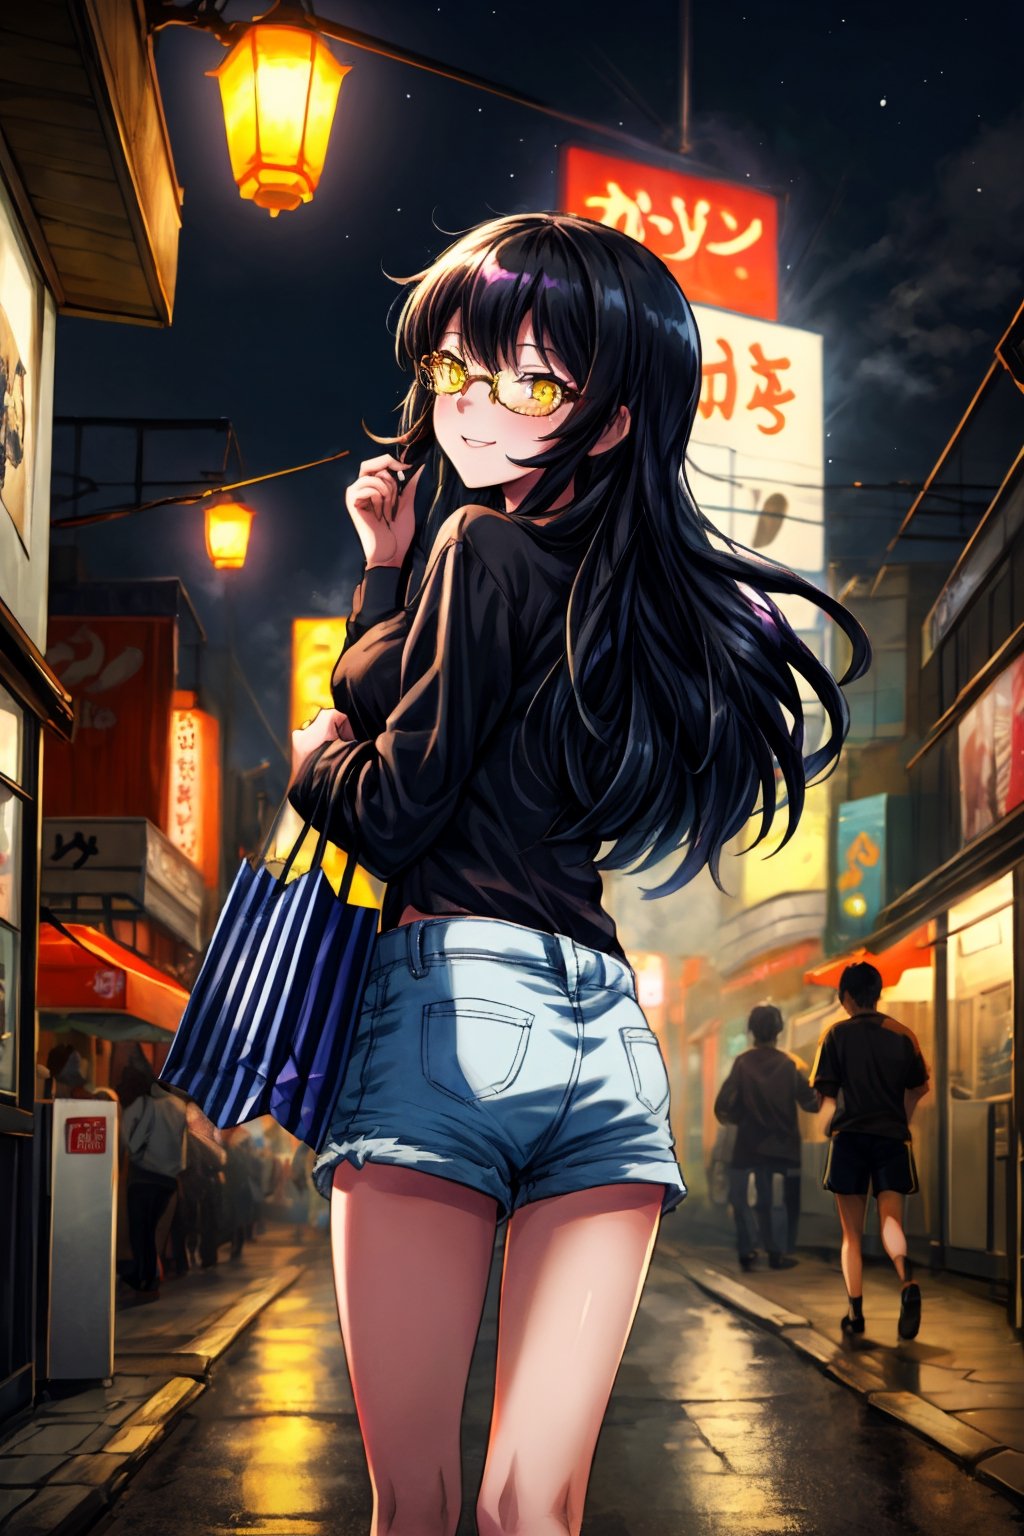 high quality, highly detailed, masterpiece, (full shot), 1 girl, alone, blake belladonna, from behind, holding a shoping bag, the exorcist movie poster pose, night, looking a house, fog, (open eyes, yellow eyes, dark black hair, slim, white skin, loose hair, smile, wink, gal style, glases, black shirt, shorts), walkint in the street of akihabara, outdoor, detailed background, very detailed background.